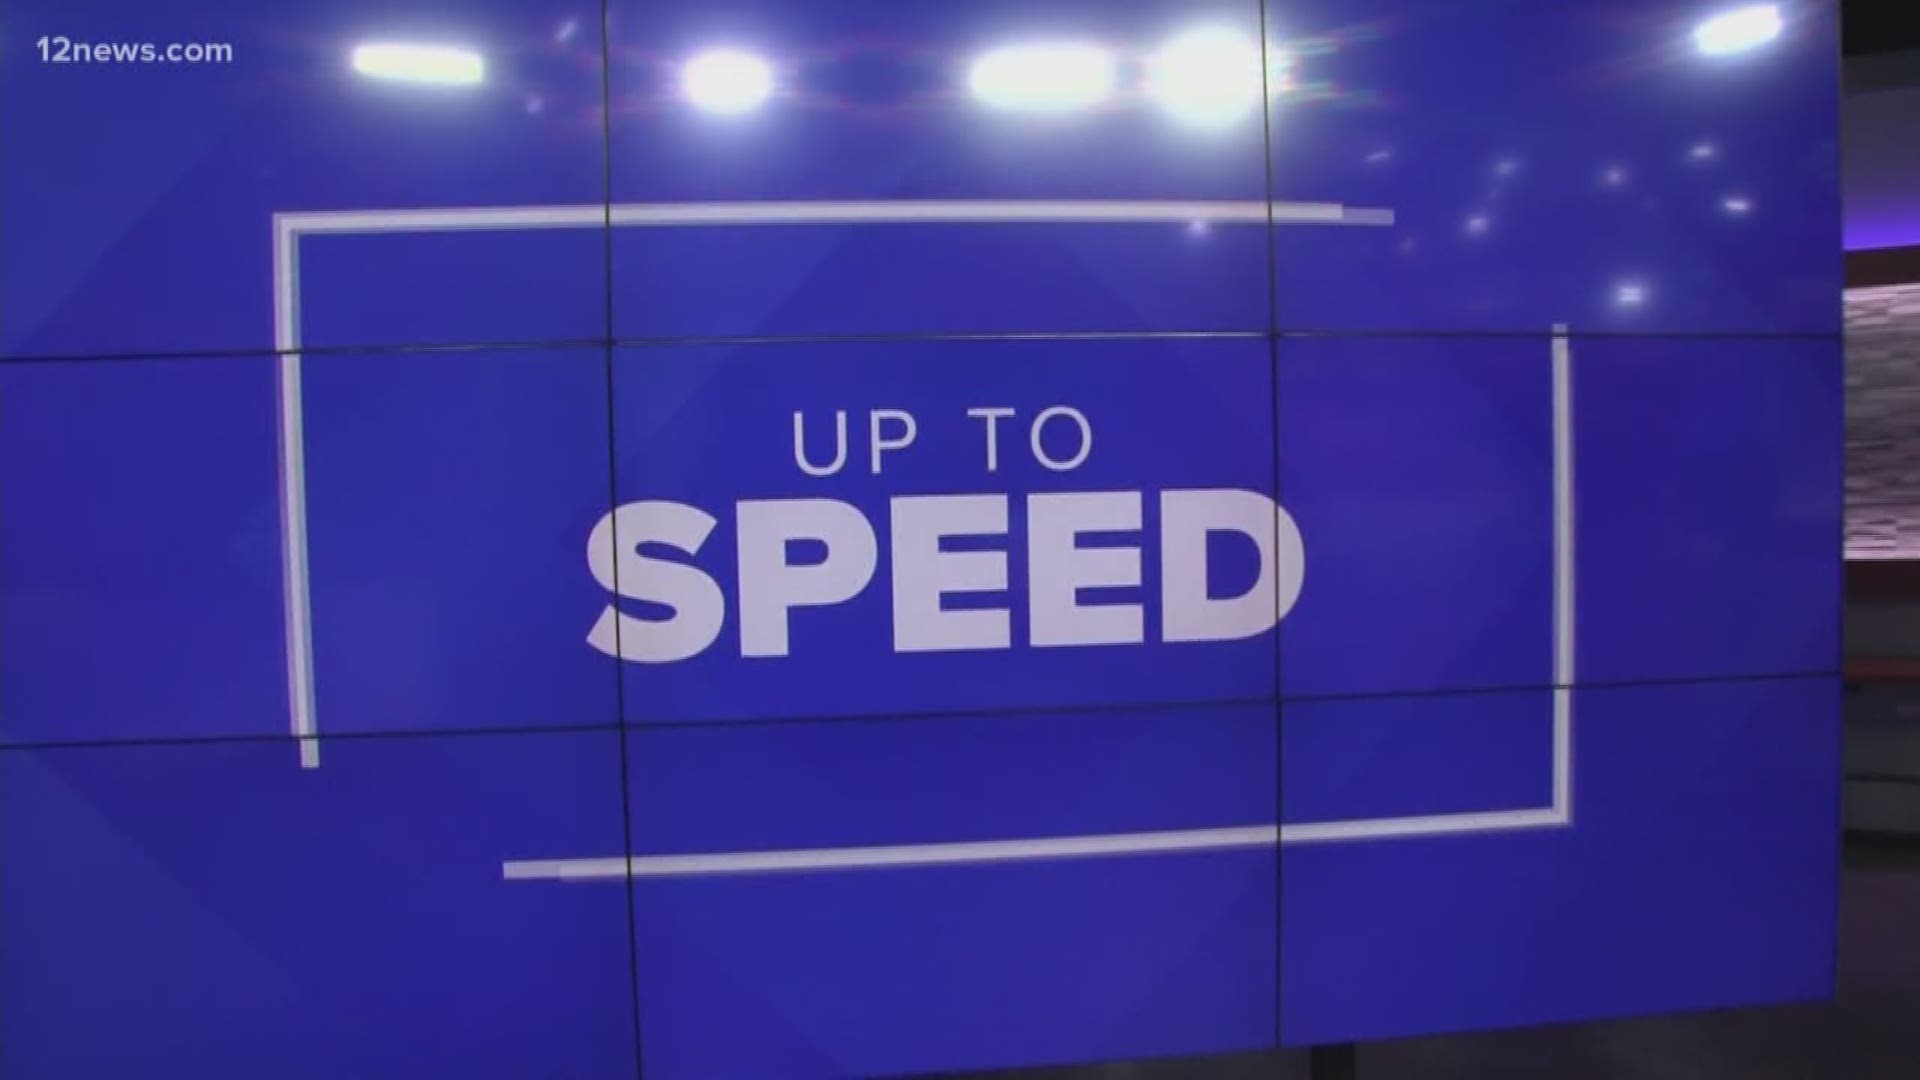 We get you "Up to Speed" on Friday afternoon with the latest news happening around the Valley and across the country.